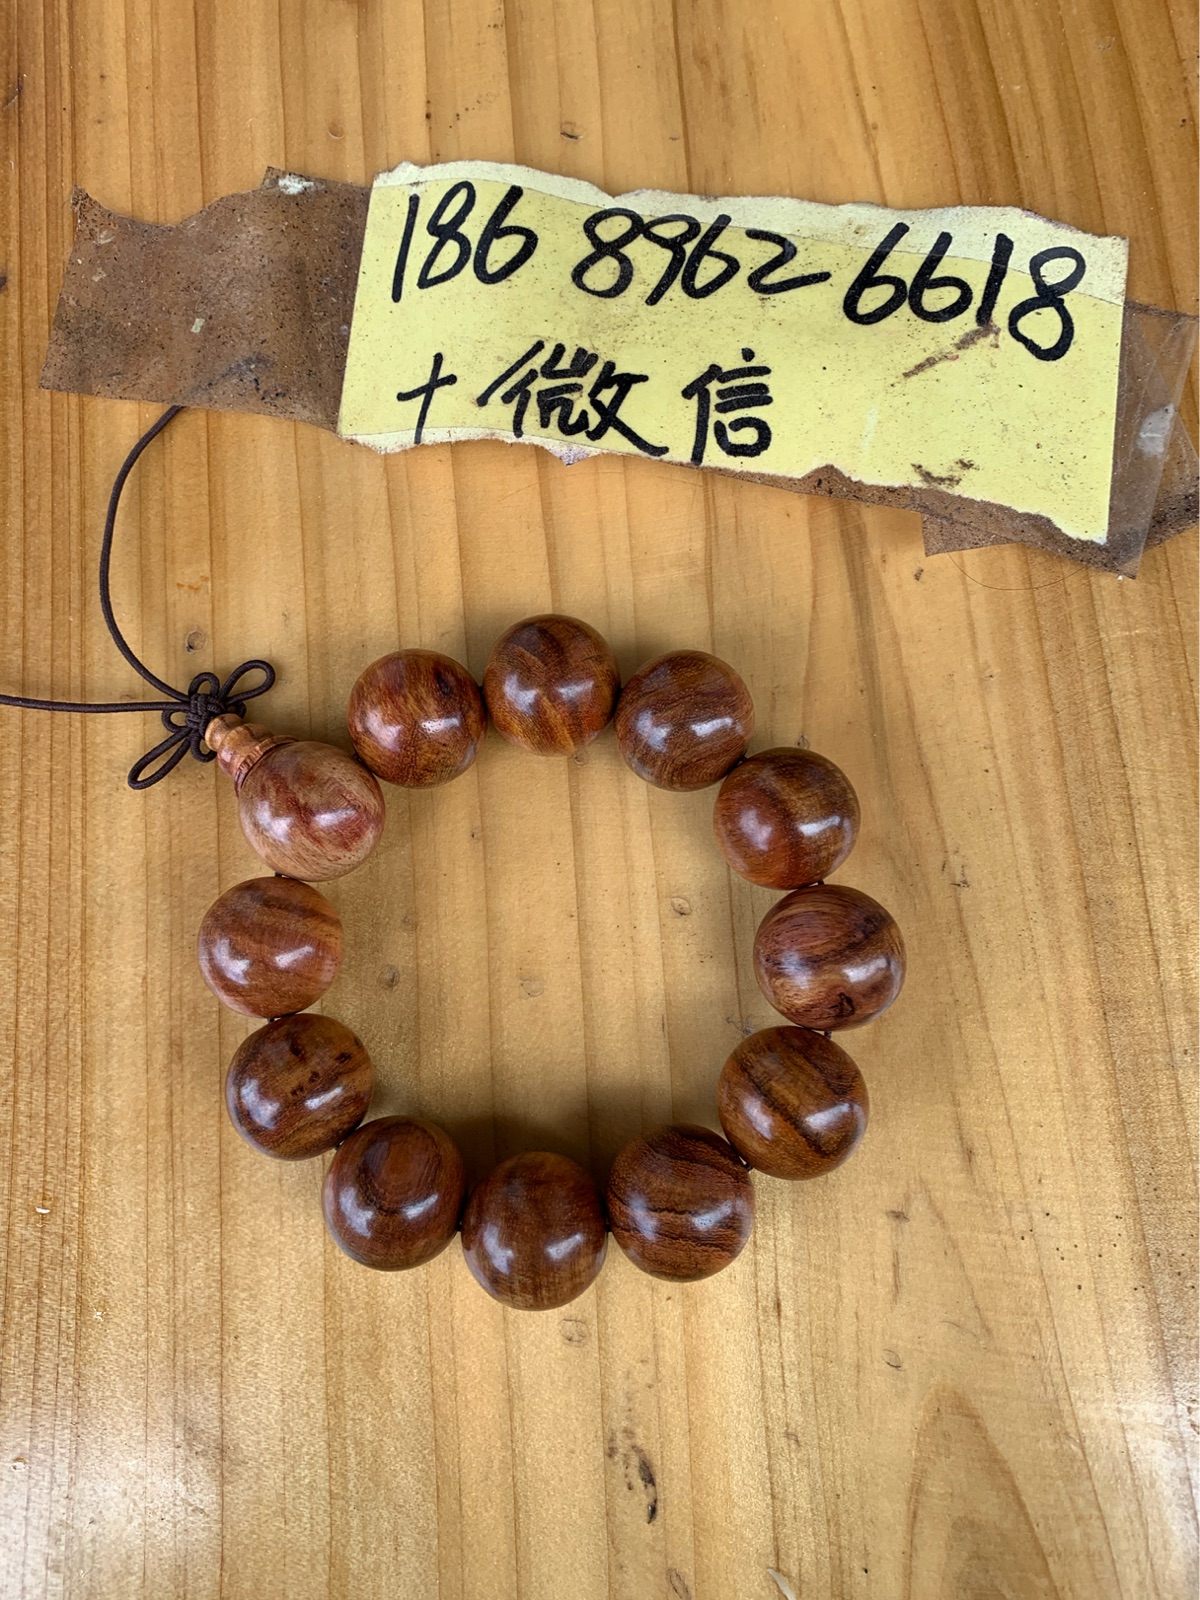 (Fidelity) Hainan Huanghuali pair eye x tattoo men and women 2.0 hand string Buddha beads Special benefits are only this one